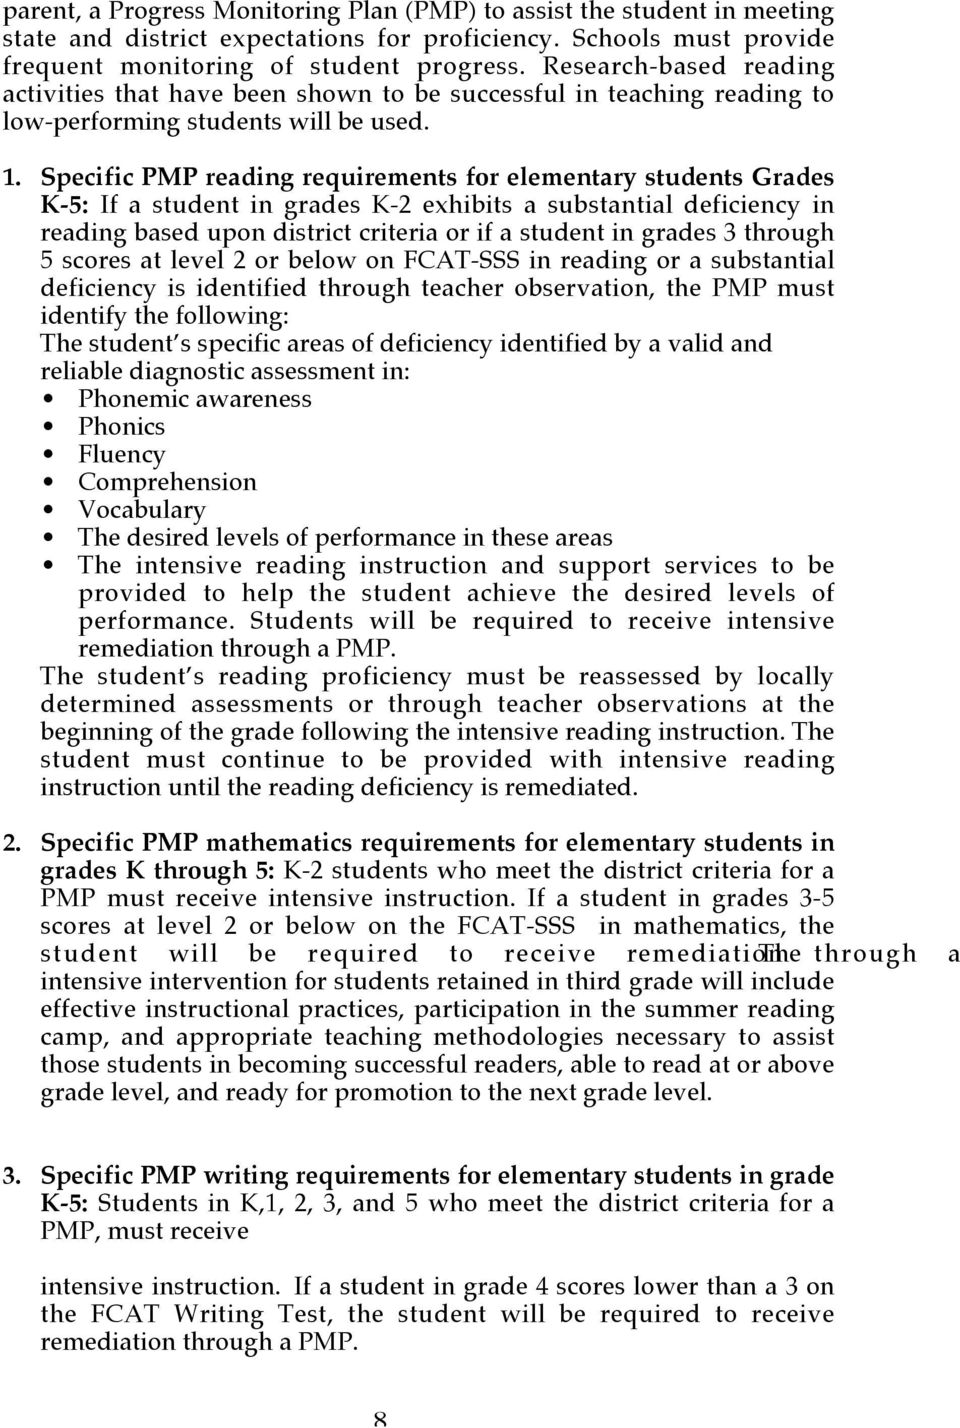 Specific PMP reading requirements for elementary students Grades K-5: If a student in grades K-2 exhibits a substantial deficiency in reading based upon district criteria or if a student in grades 3